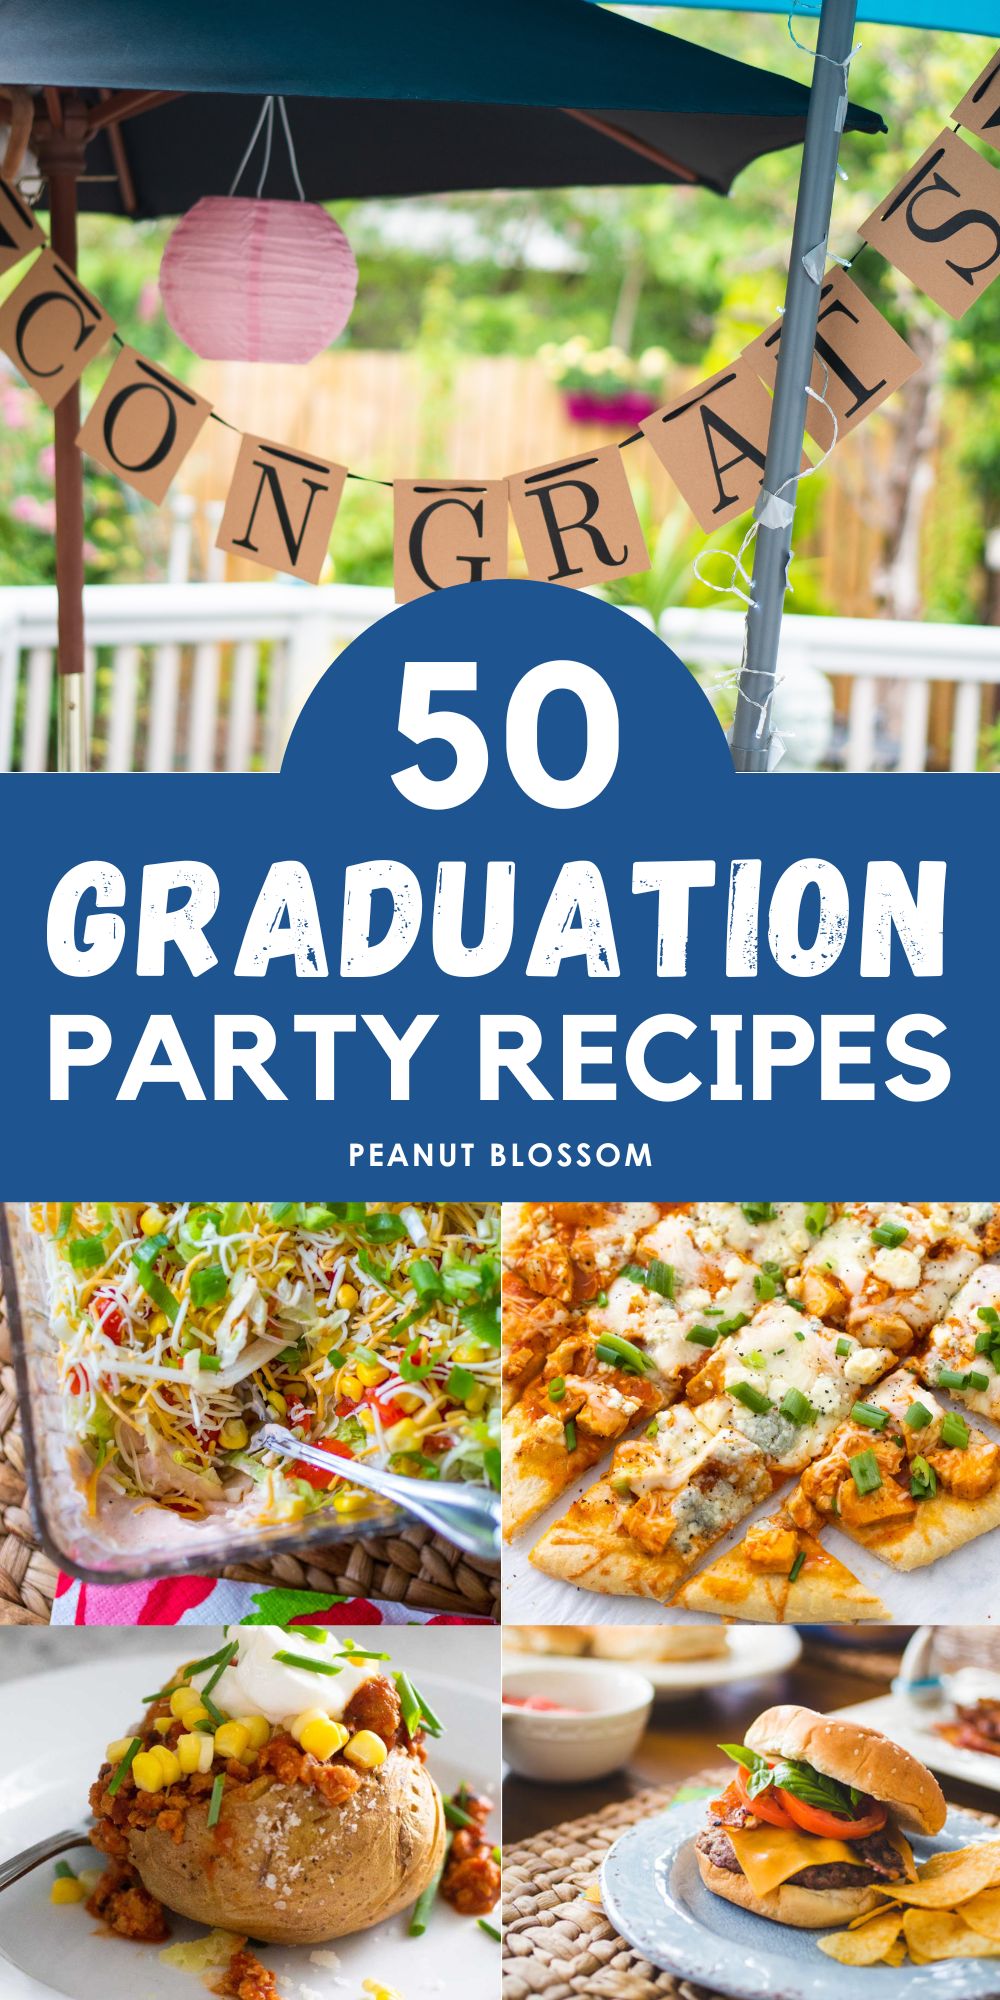 A photo collage shows a college graduation party in a backyard and 4 easy recipes to serve for food.